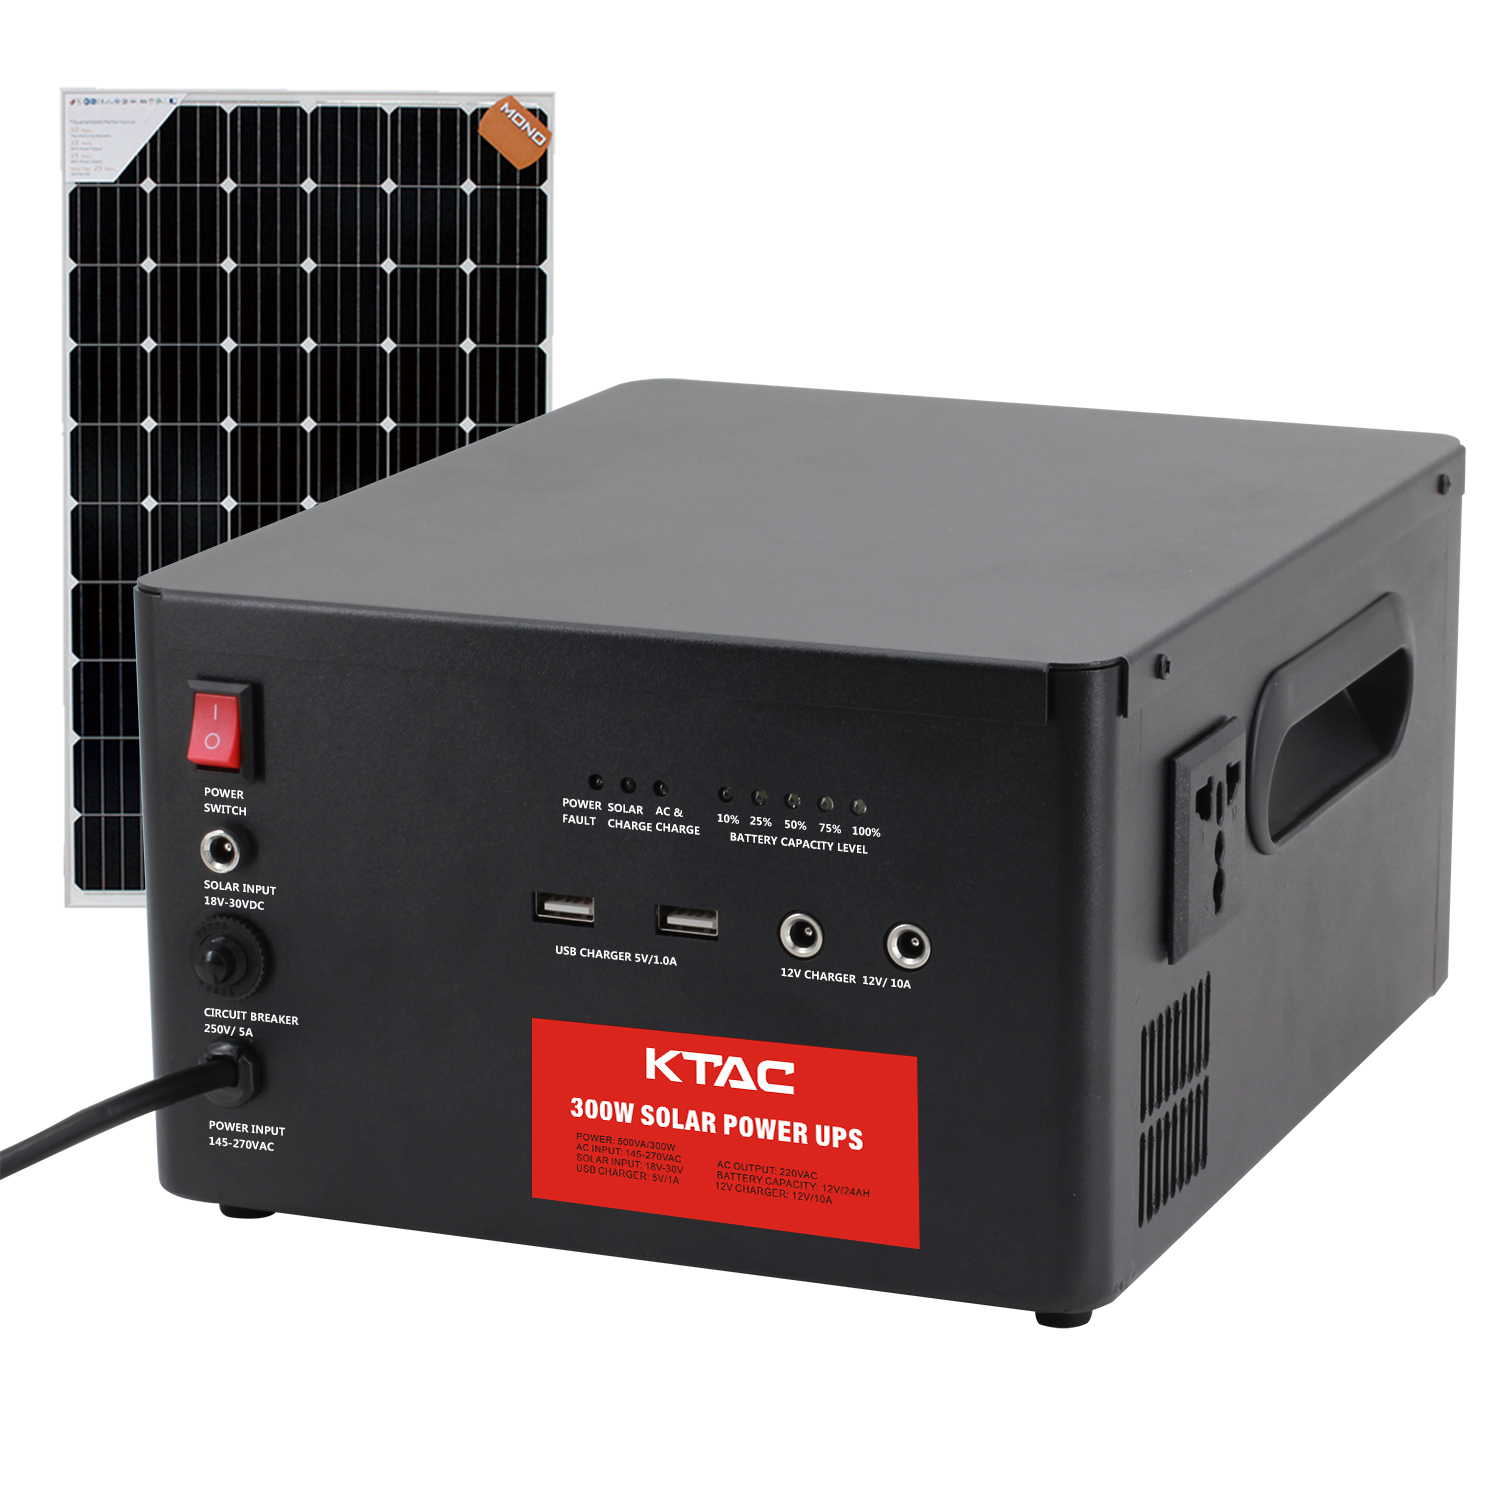 500VA solar UPS with built in battery USB charger and 12V DC charger